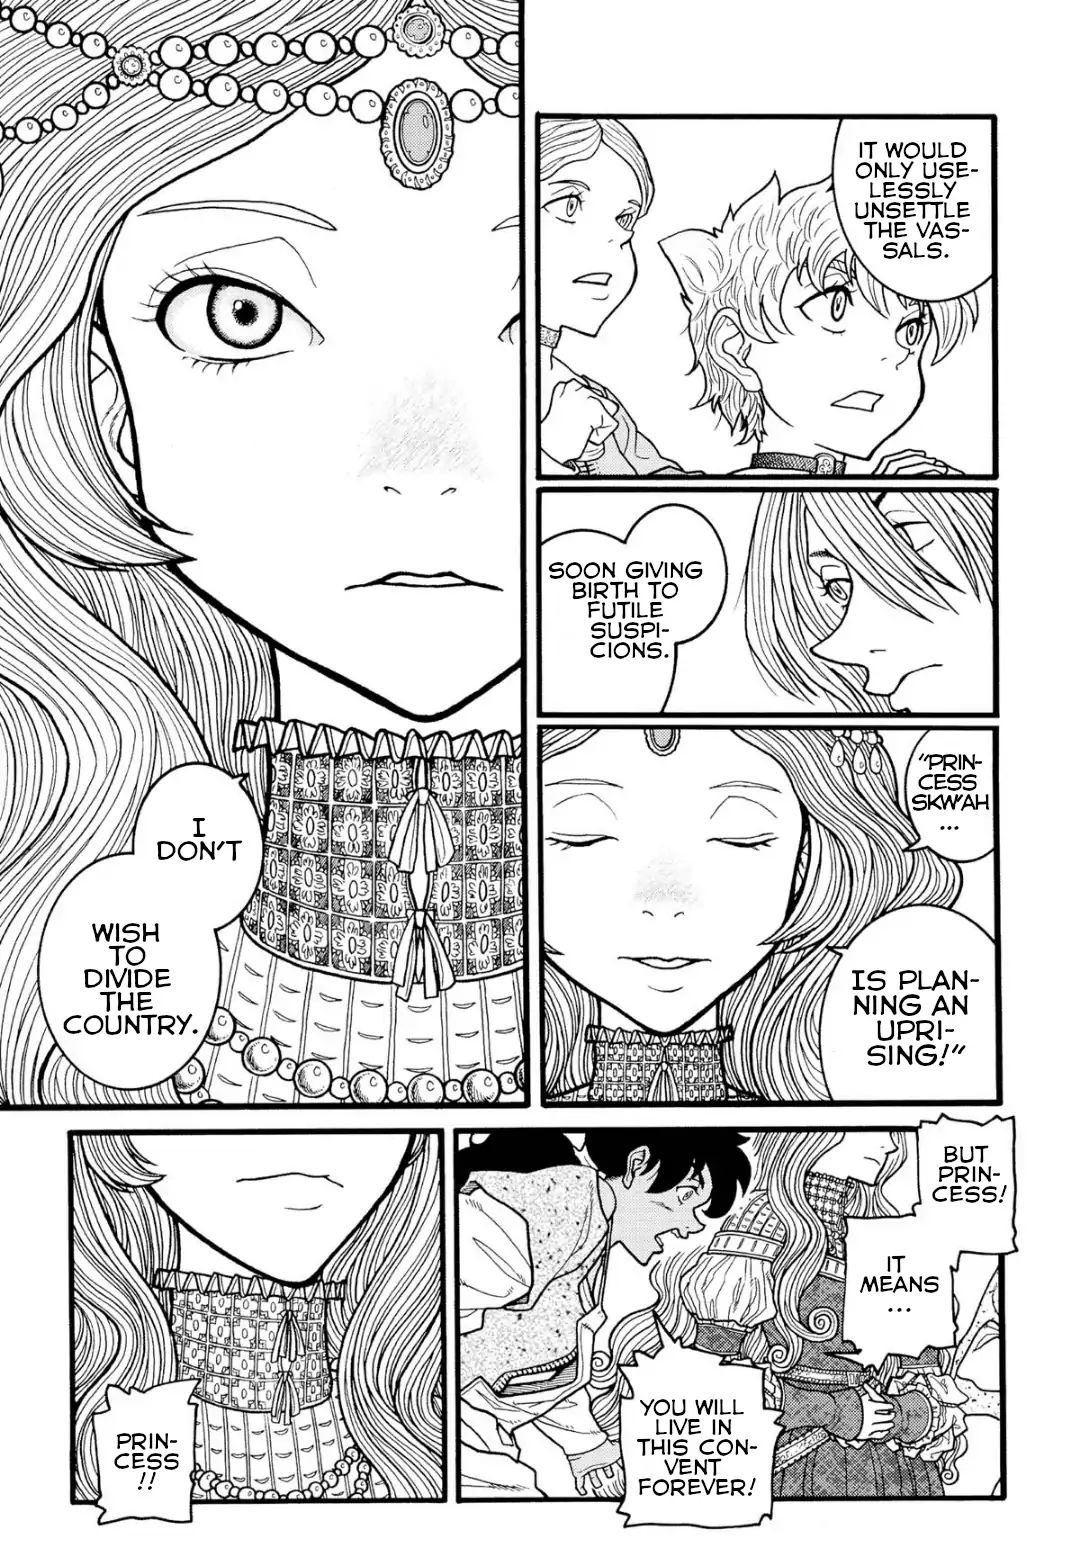 Princess Candle Vol.1 Chapter 4: I don't care if I'm hated